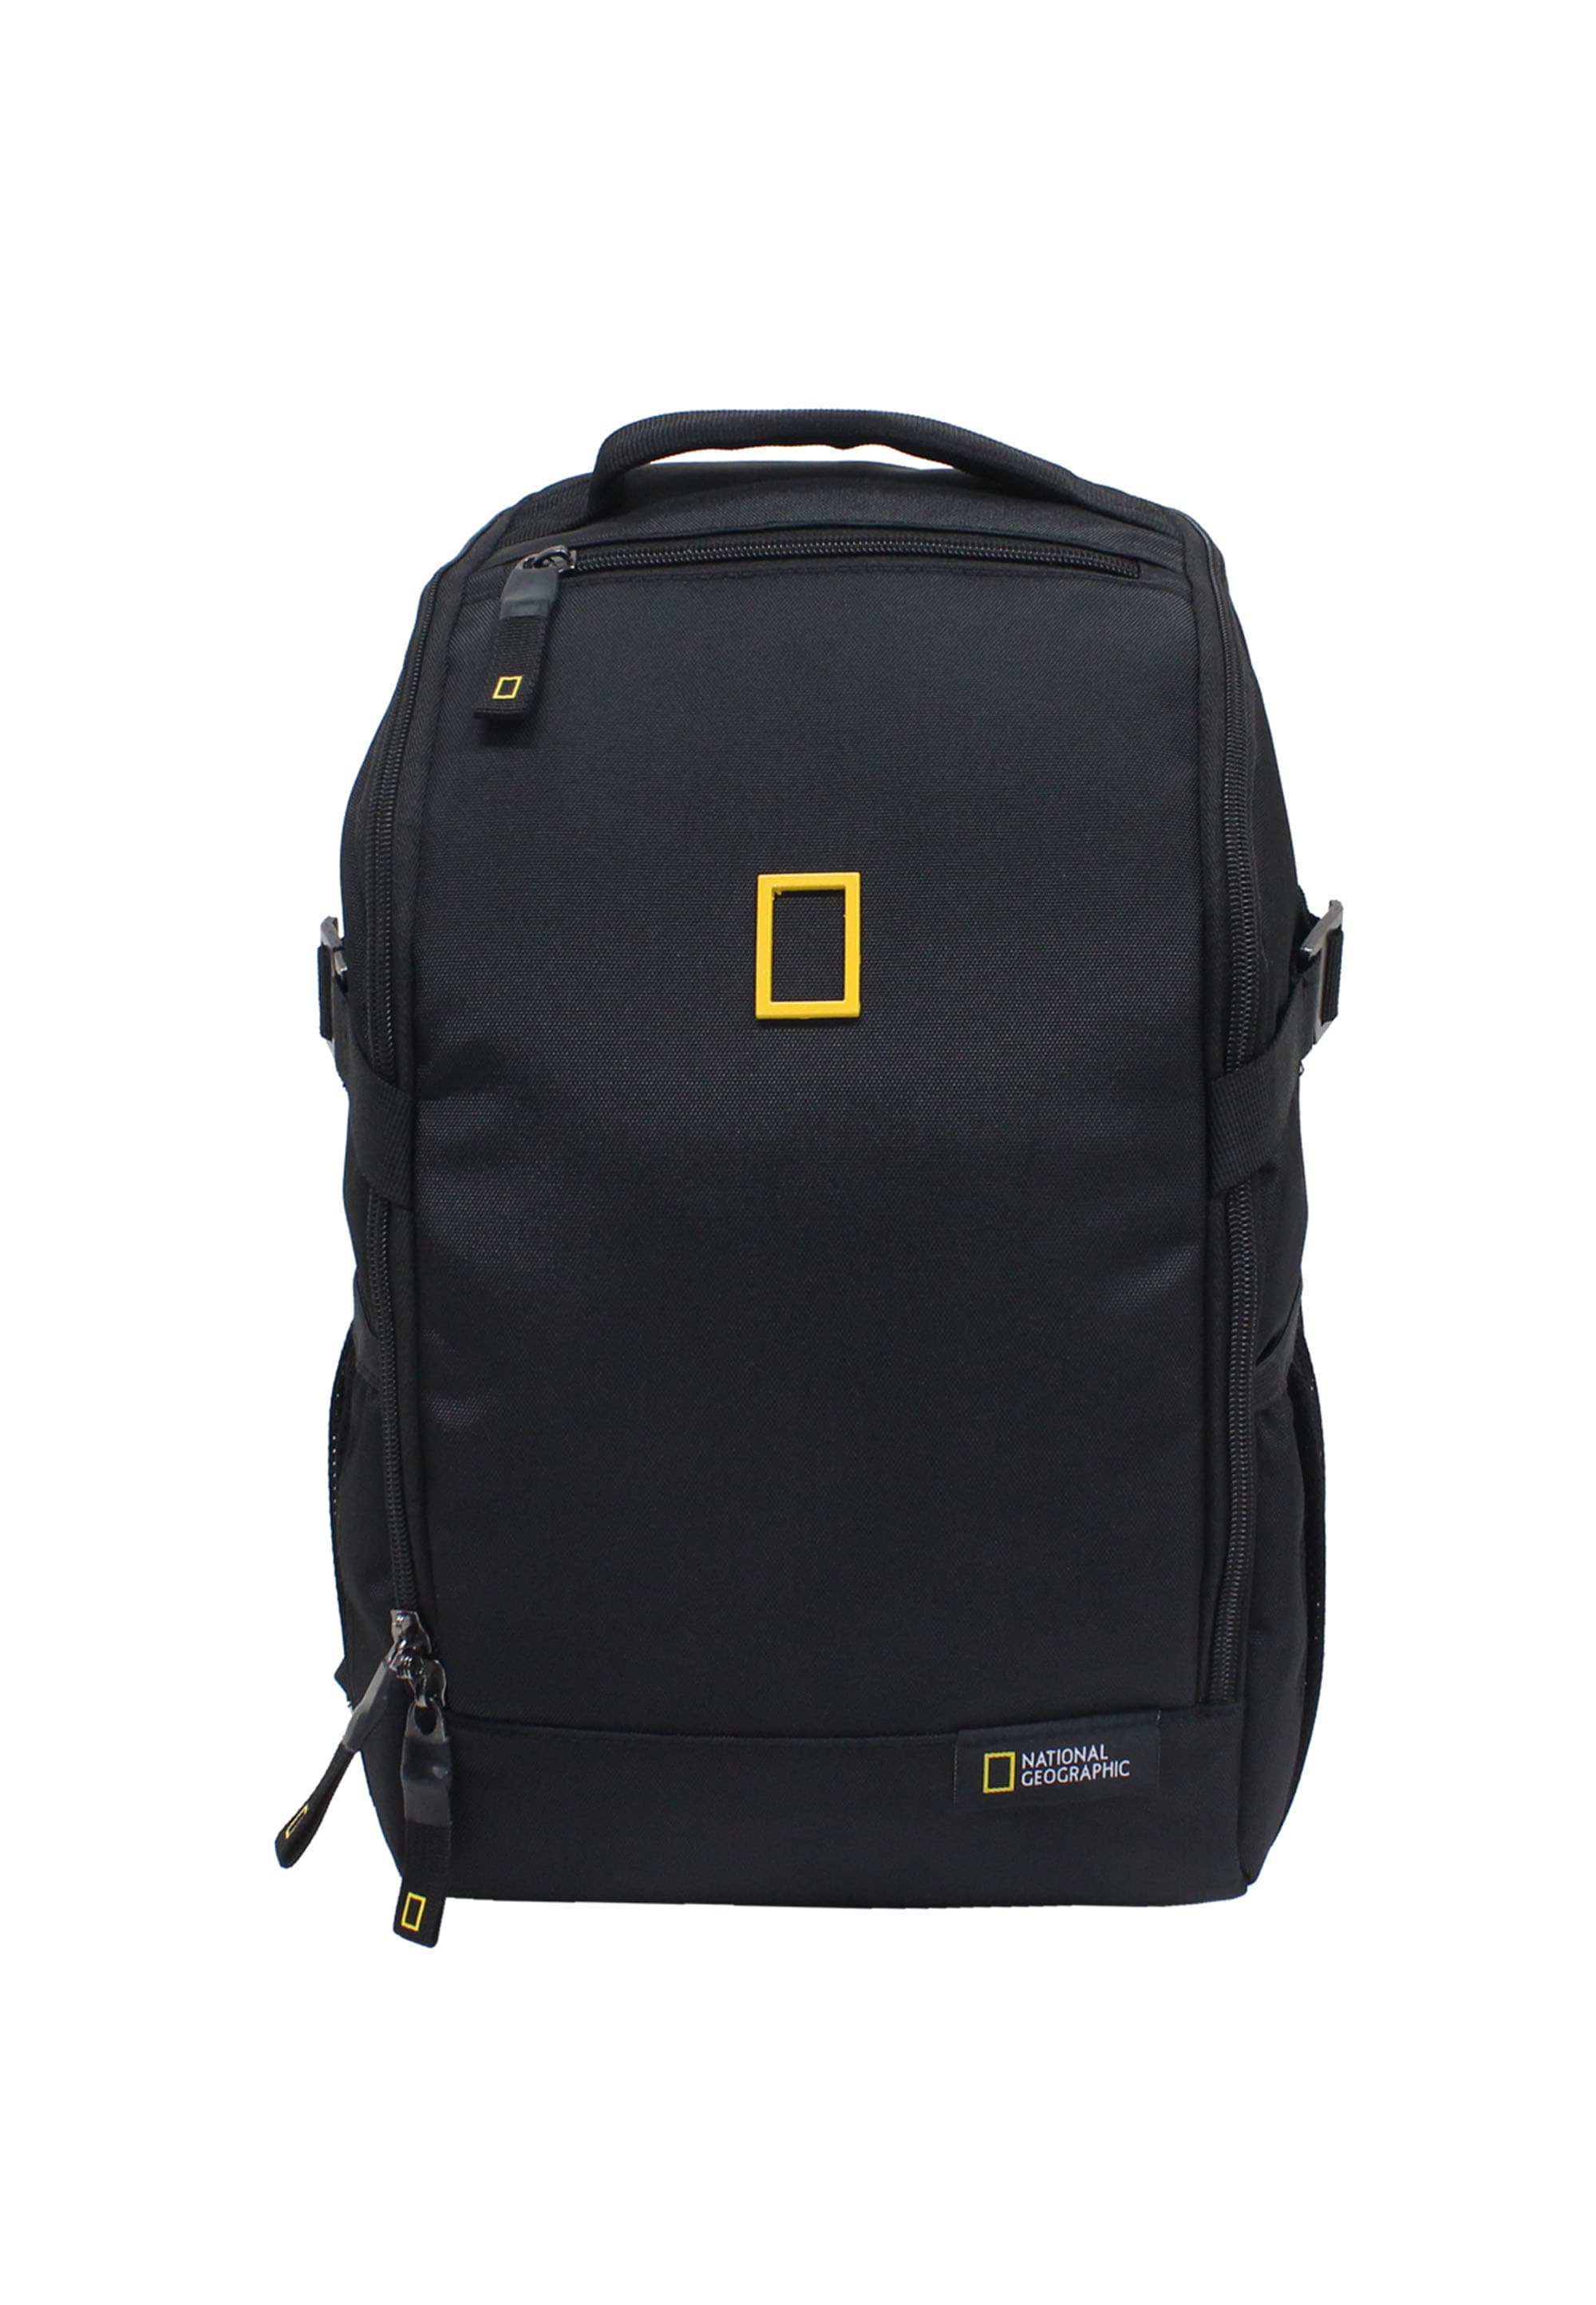 NATIONAL GEOGRAPHIC Cityrucksack "Recovery", aus robustem Polyester-Material mit RPET-Tasche